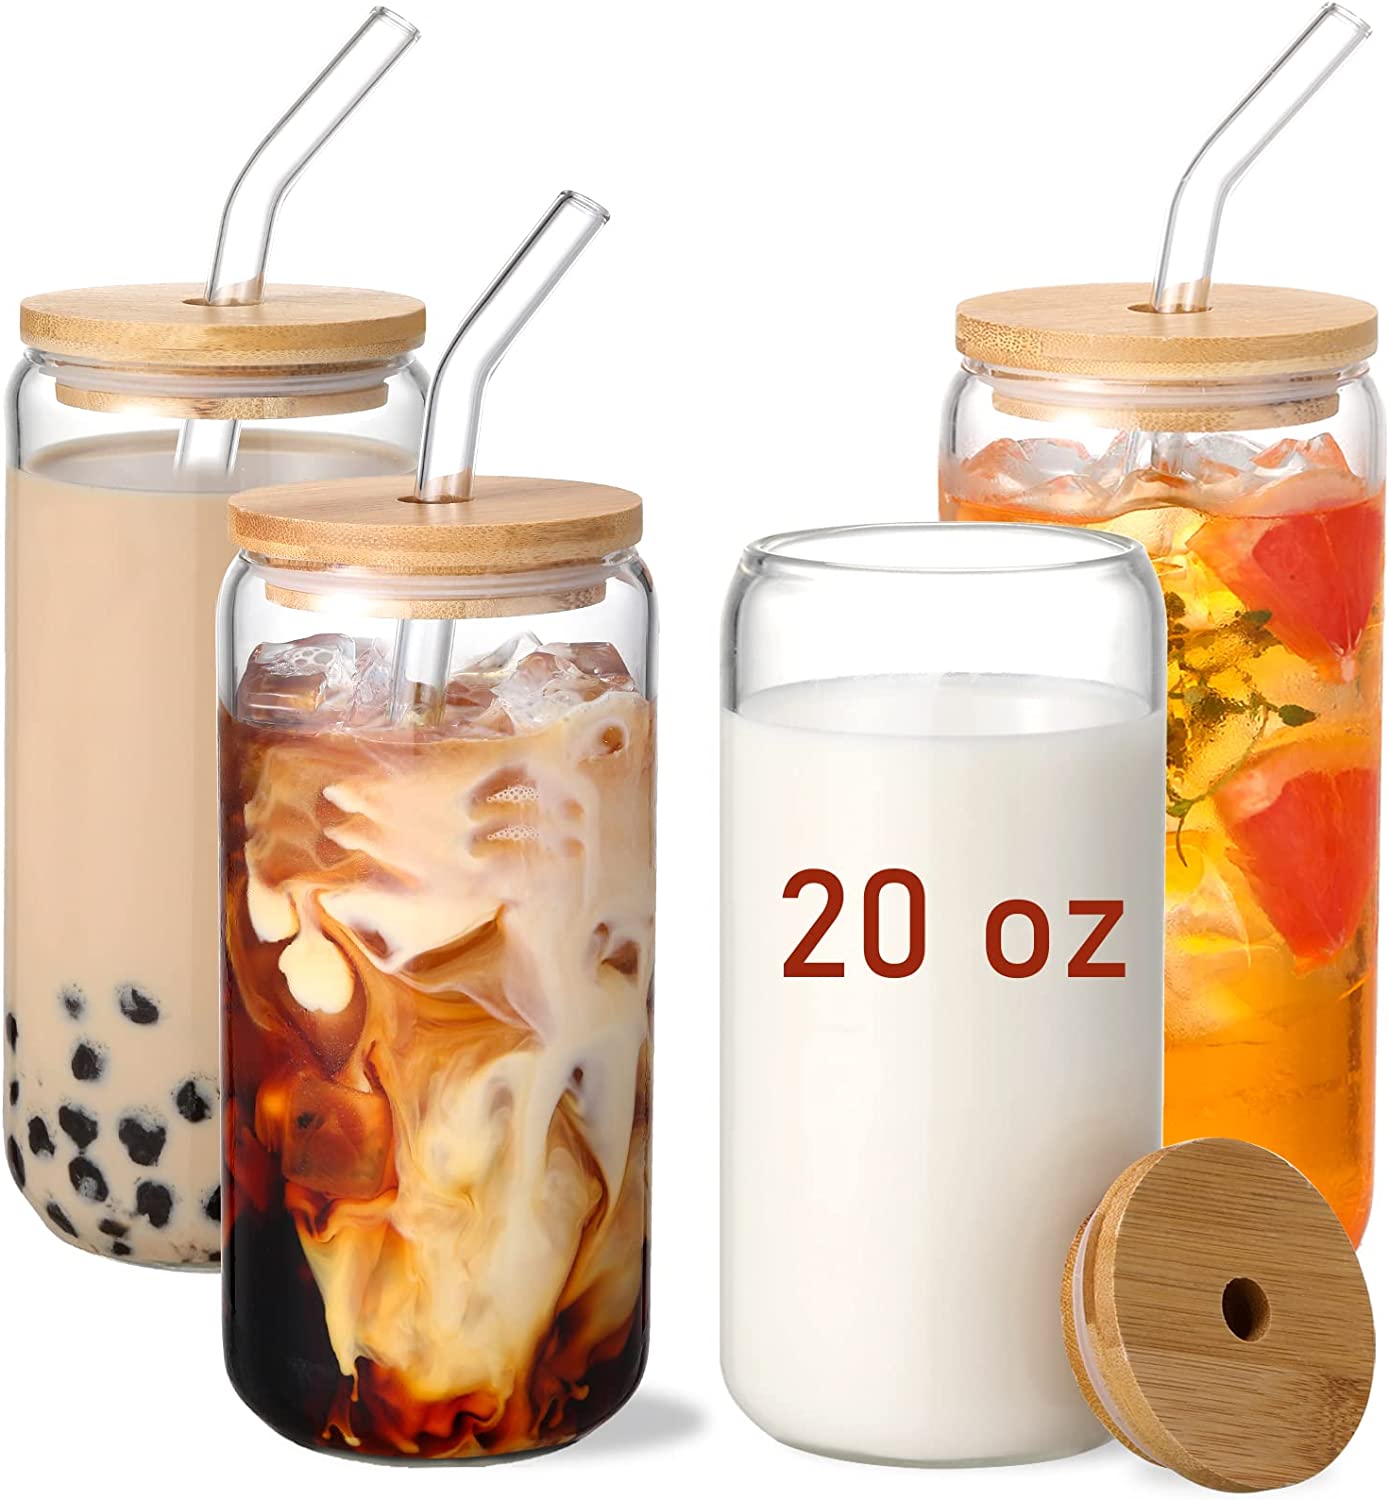 Glass Cups with Lids and Straws 6pcs Set,HuaQi Beer Can Glass with